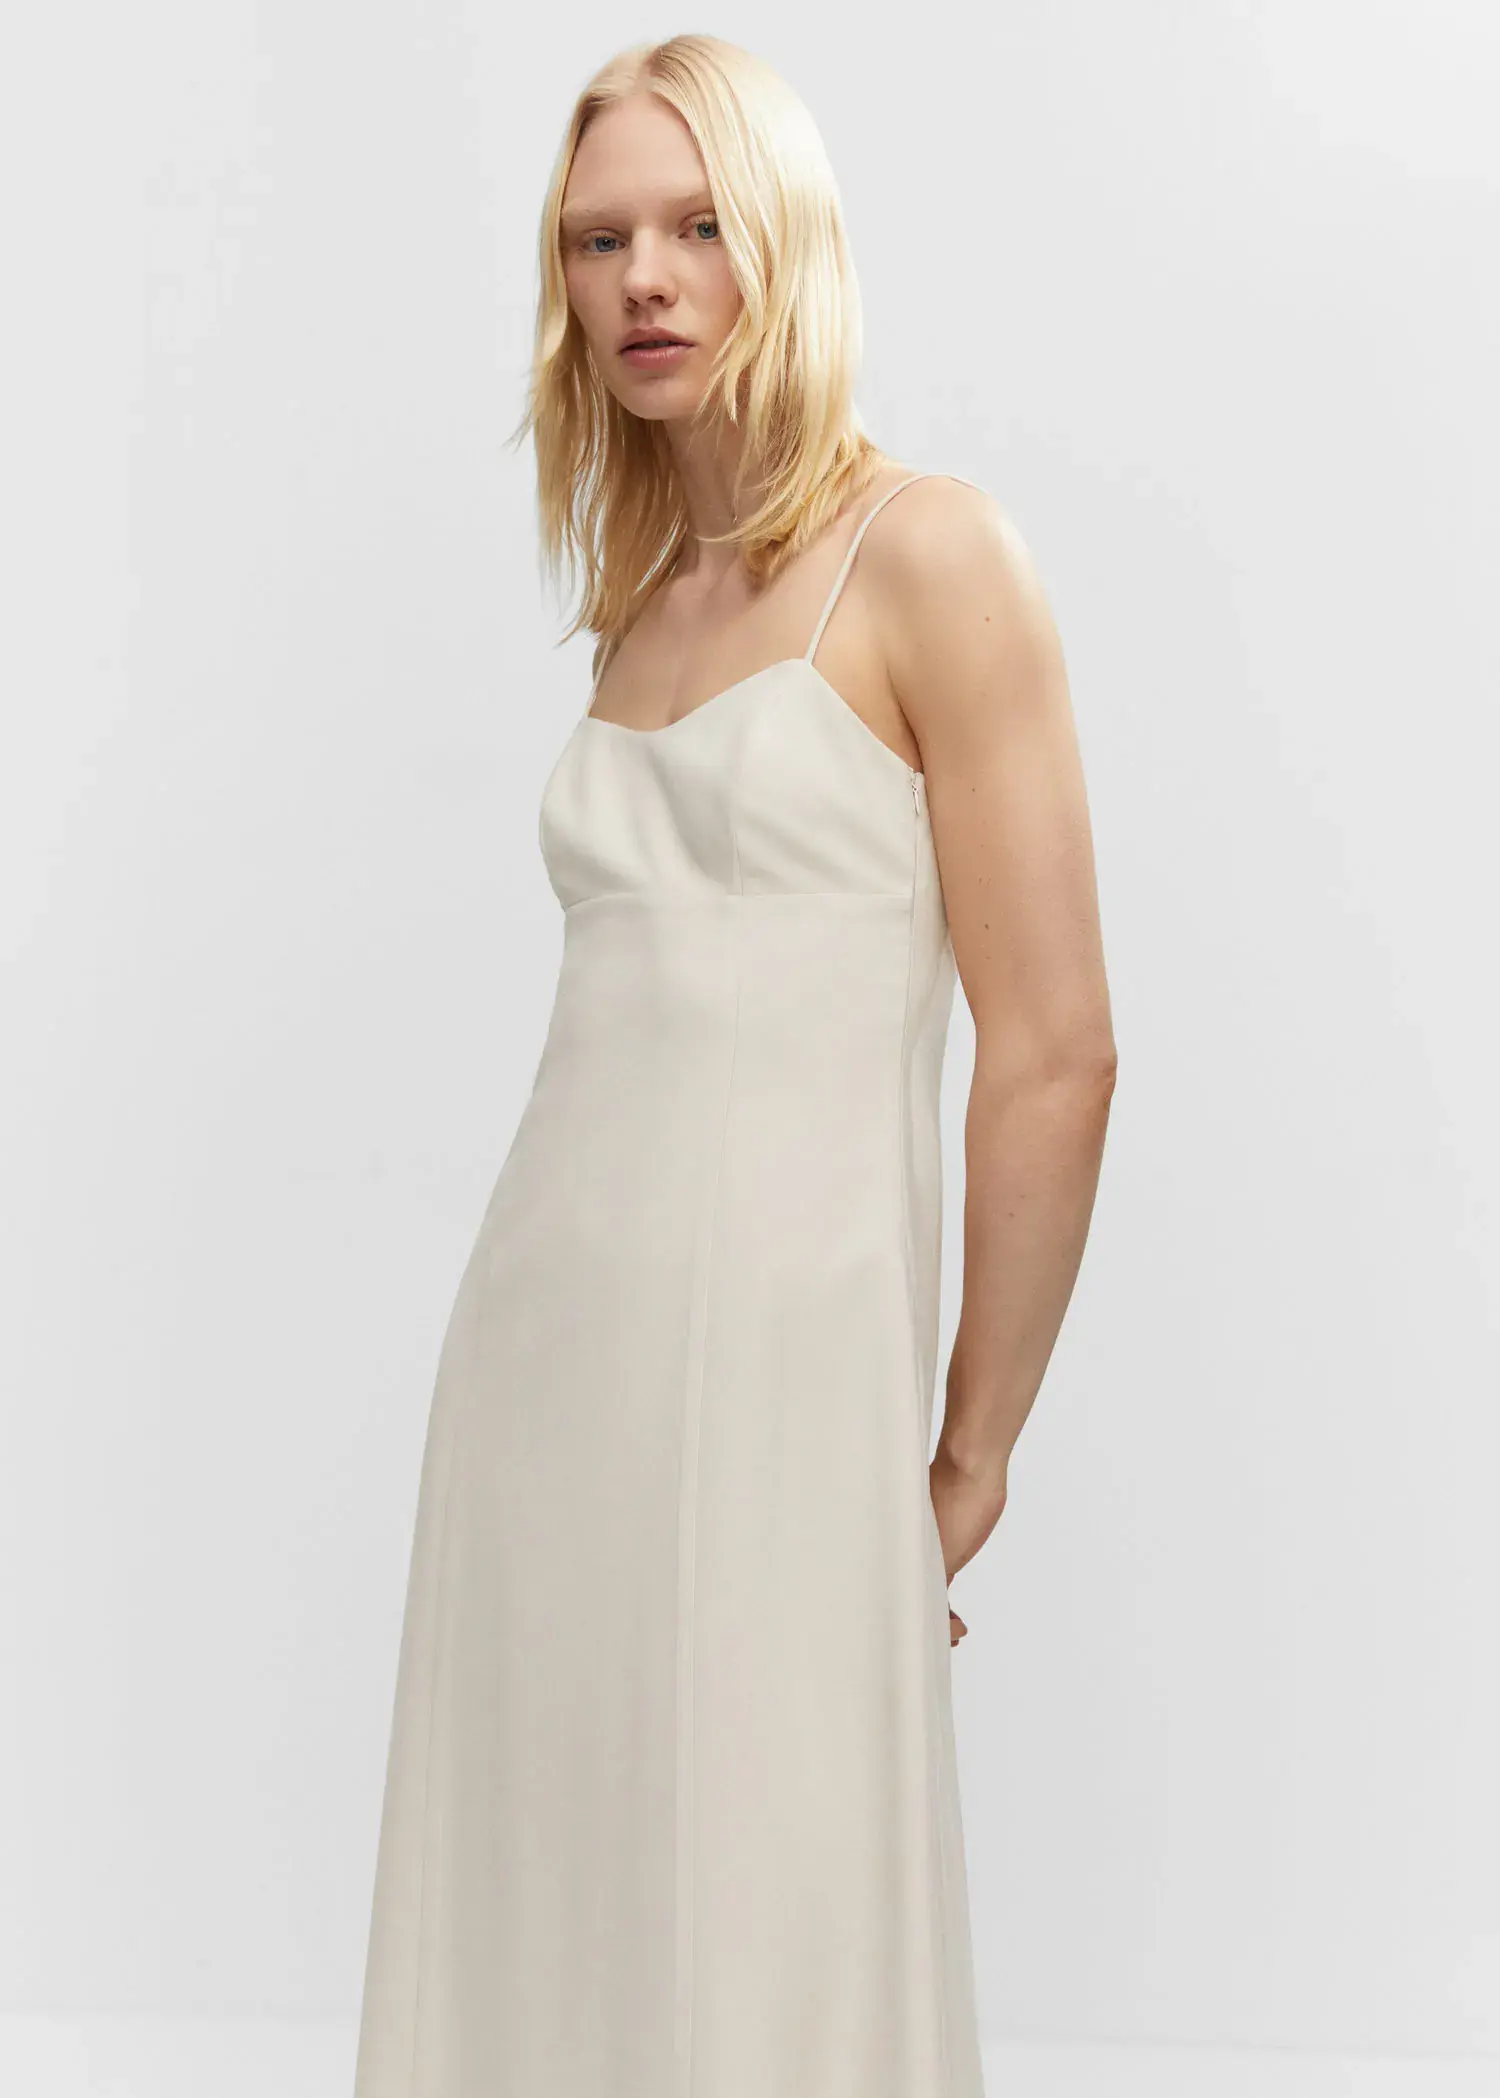 Mango Low-cut midi-dress. a woman wearing a white dress standing in front of a white wall. 